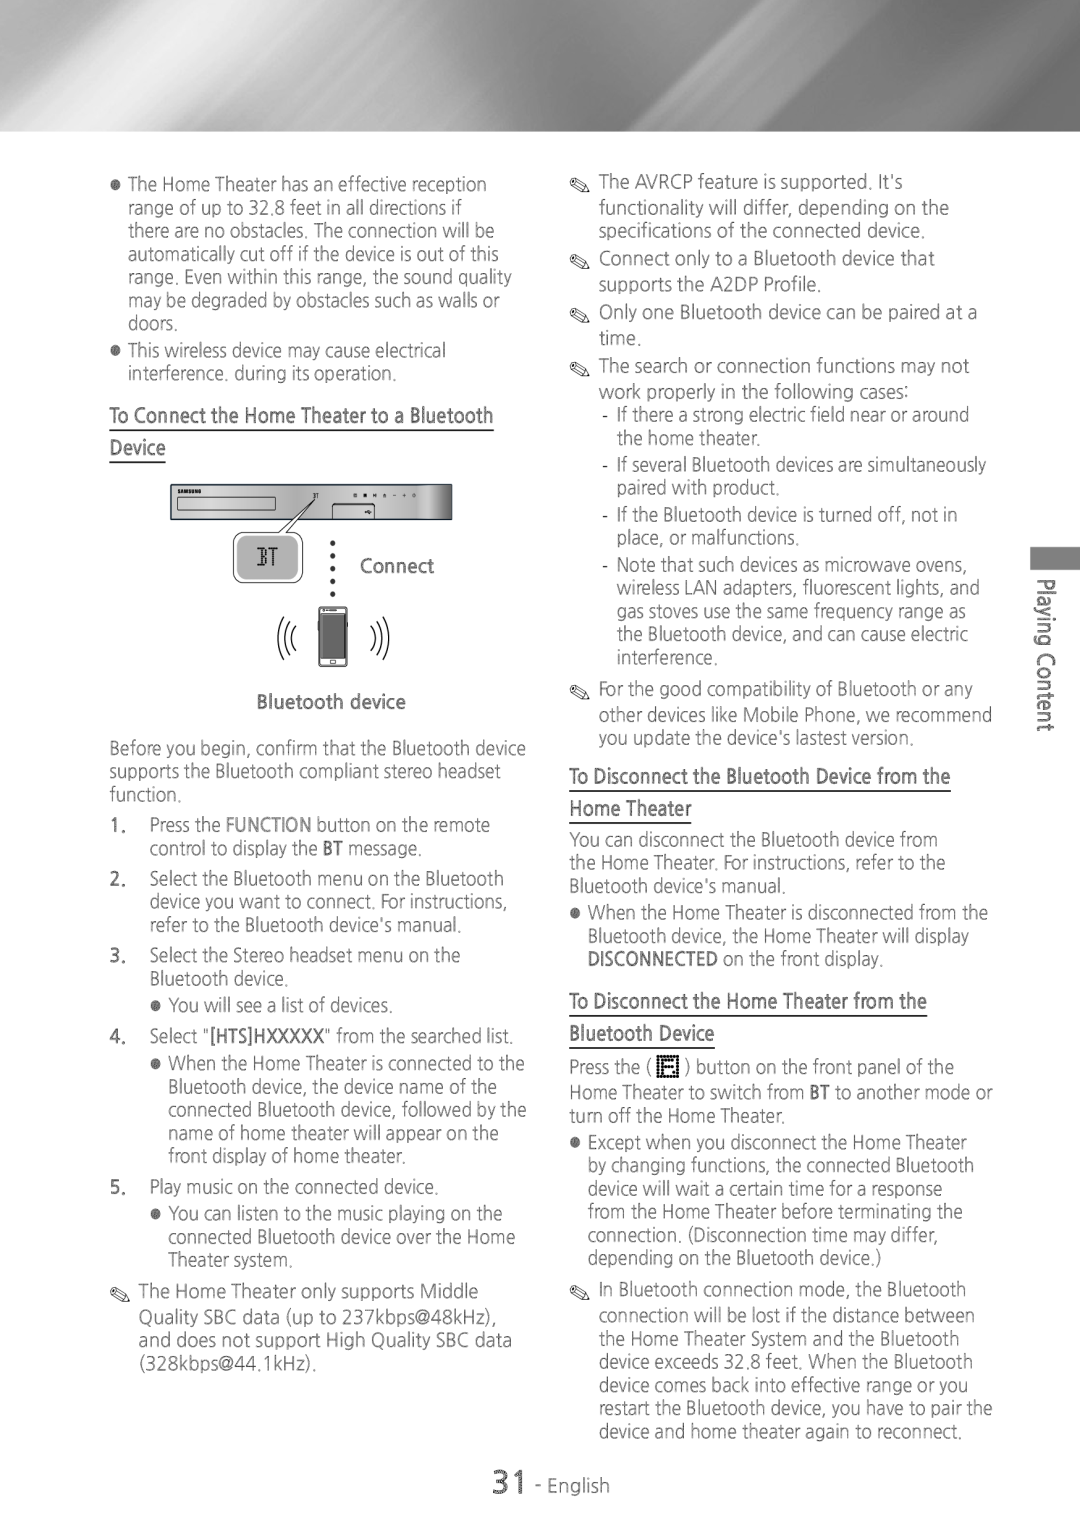 Samsung HTH5500 user manual To Disconnect the Home Theater from the, Bluetooth Device, Connect Bluetooth device 